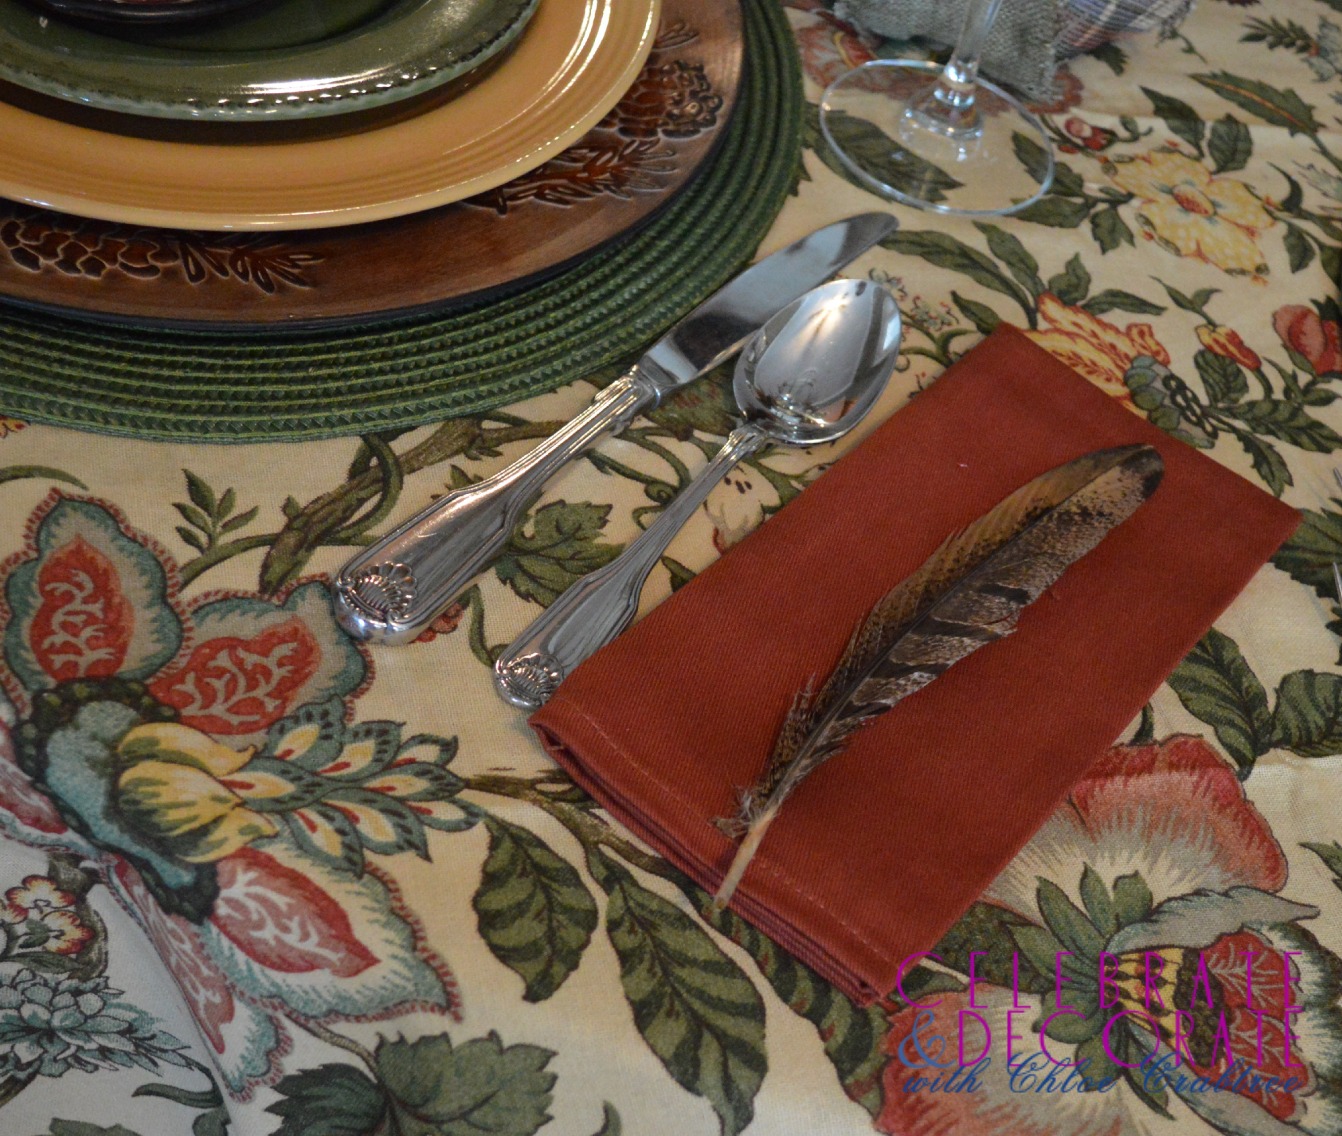 Thanksgiving tablescape 5